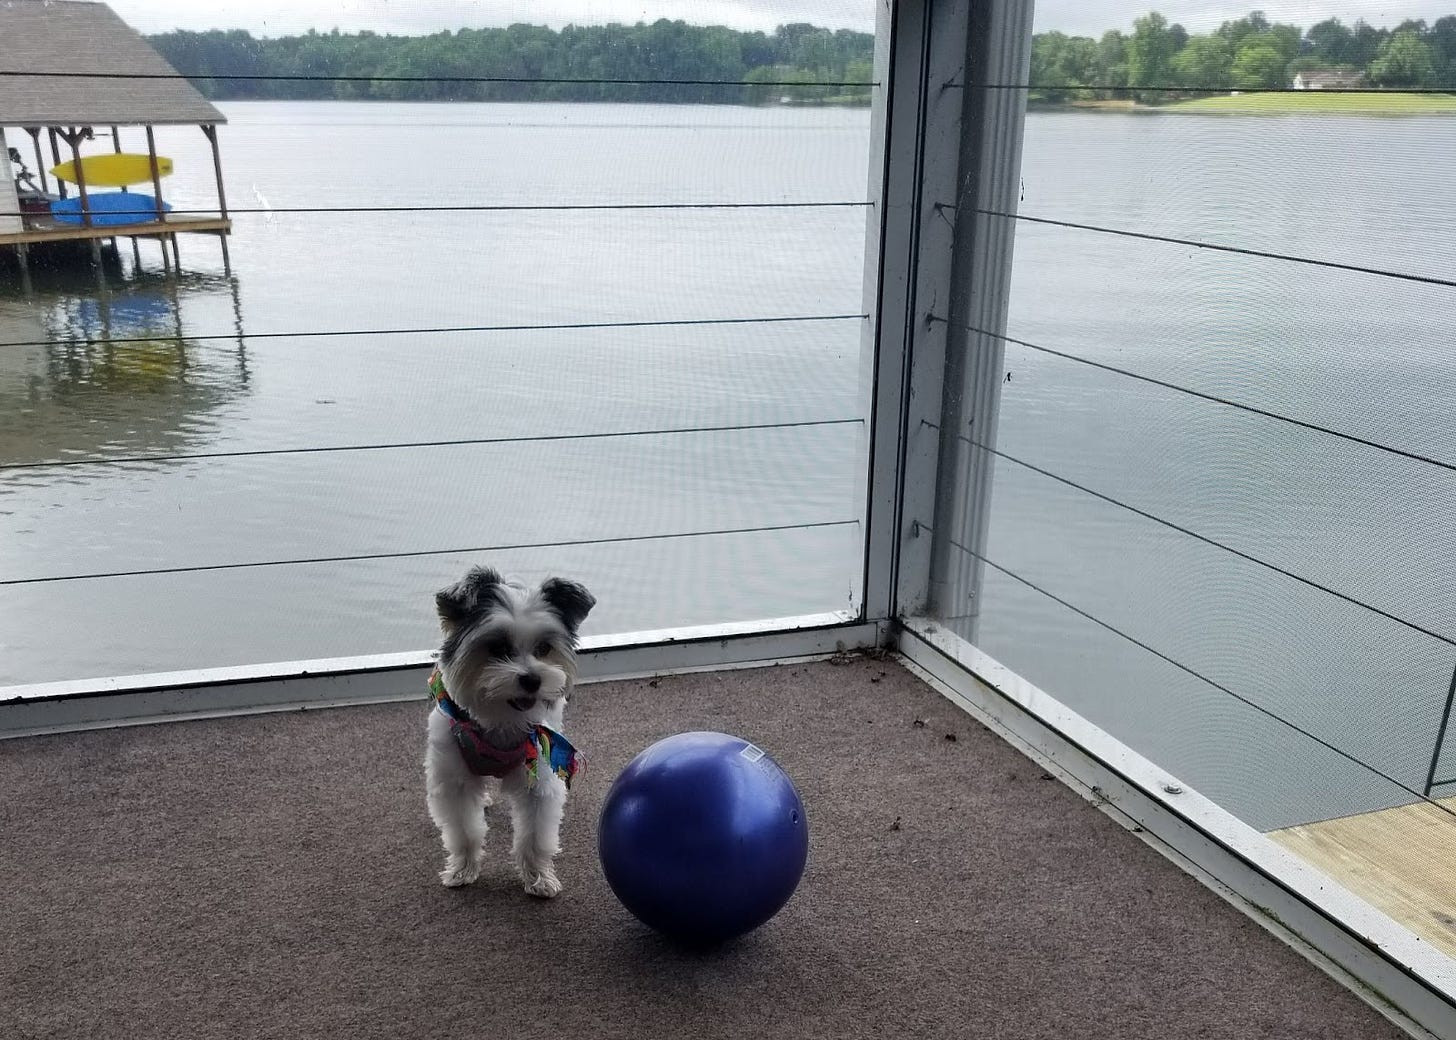 Dog and ball on porch overlooking lake